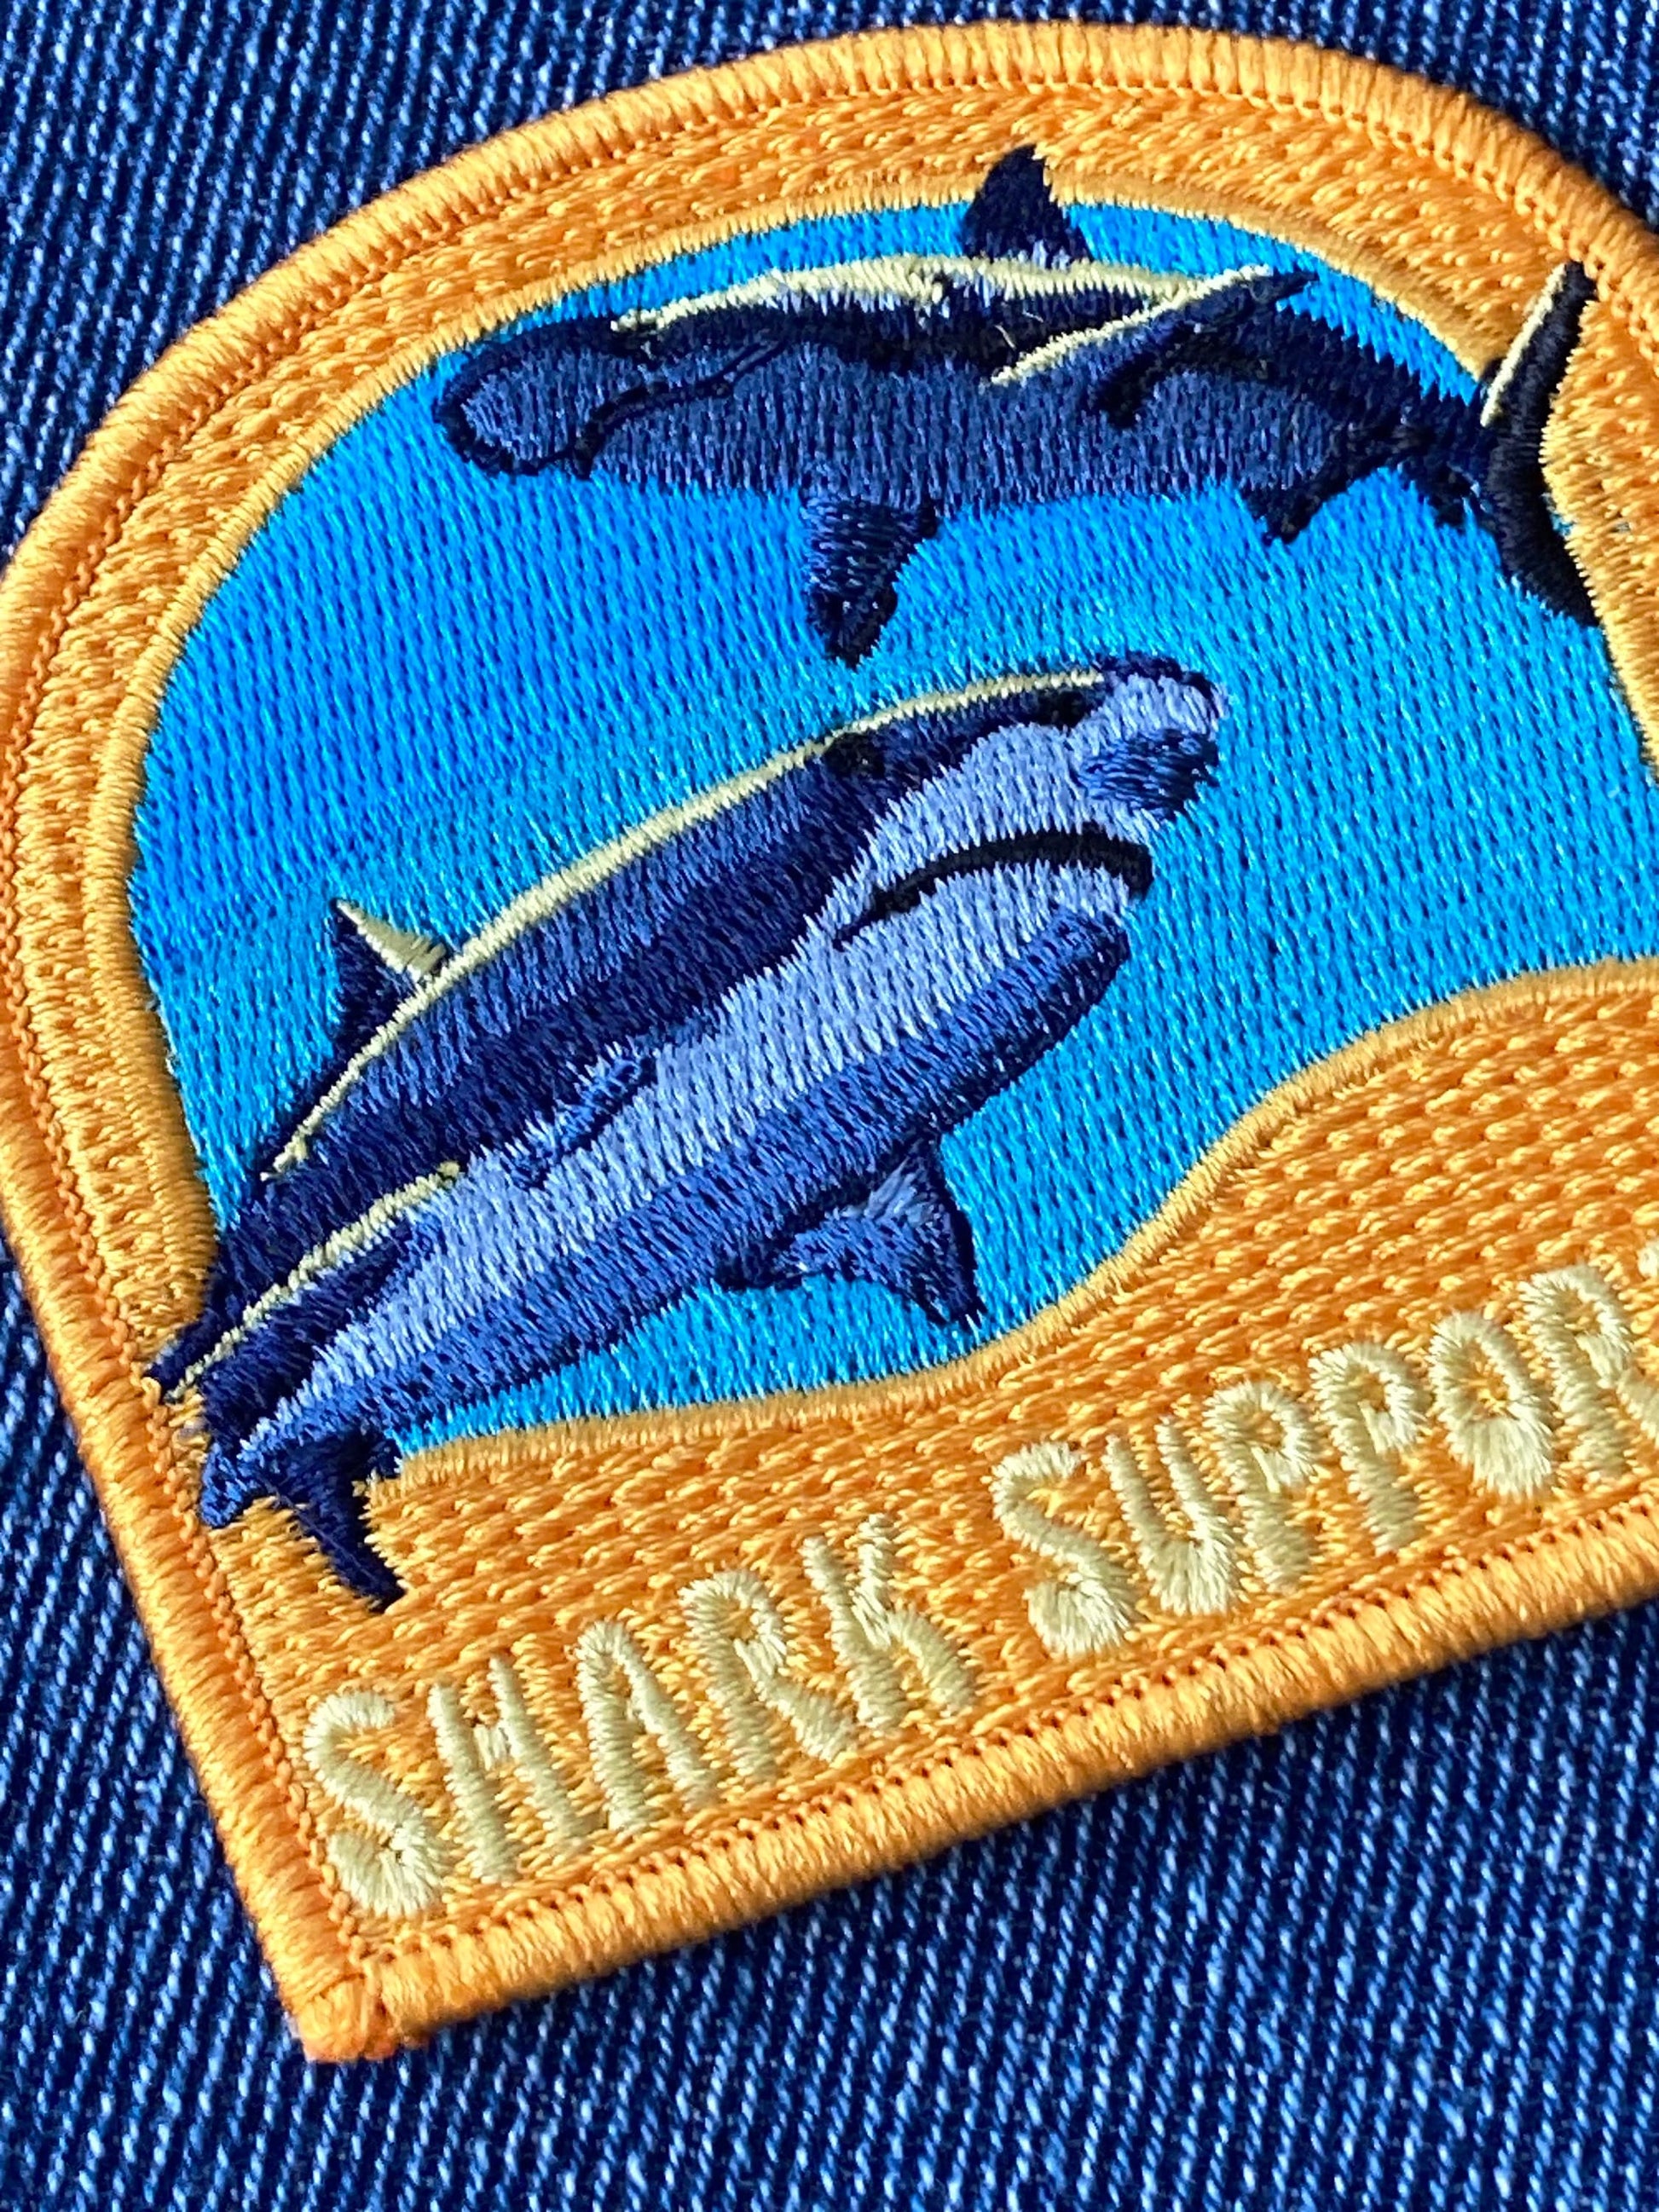 Shark Supporter Patch - Embroidered Travel Collectible for Shark